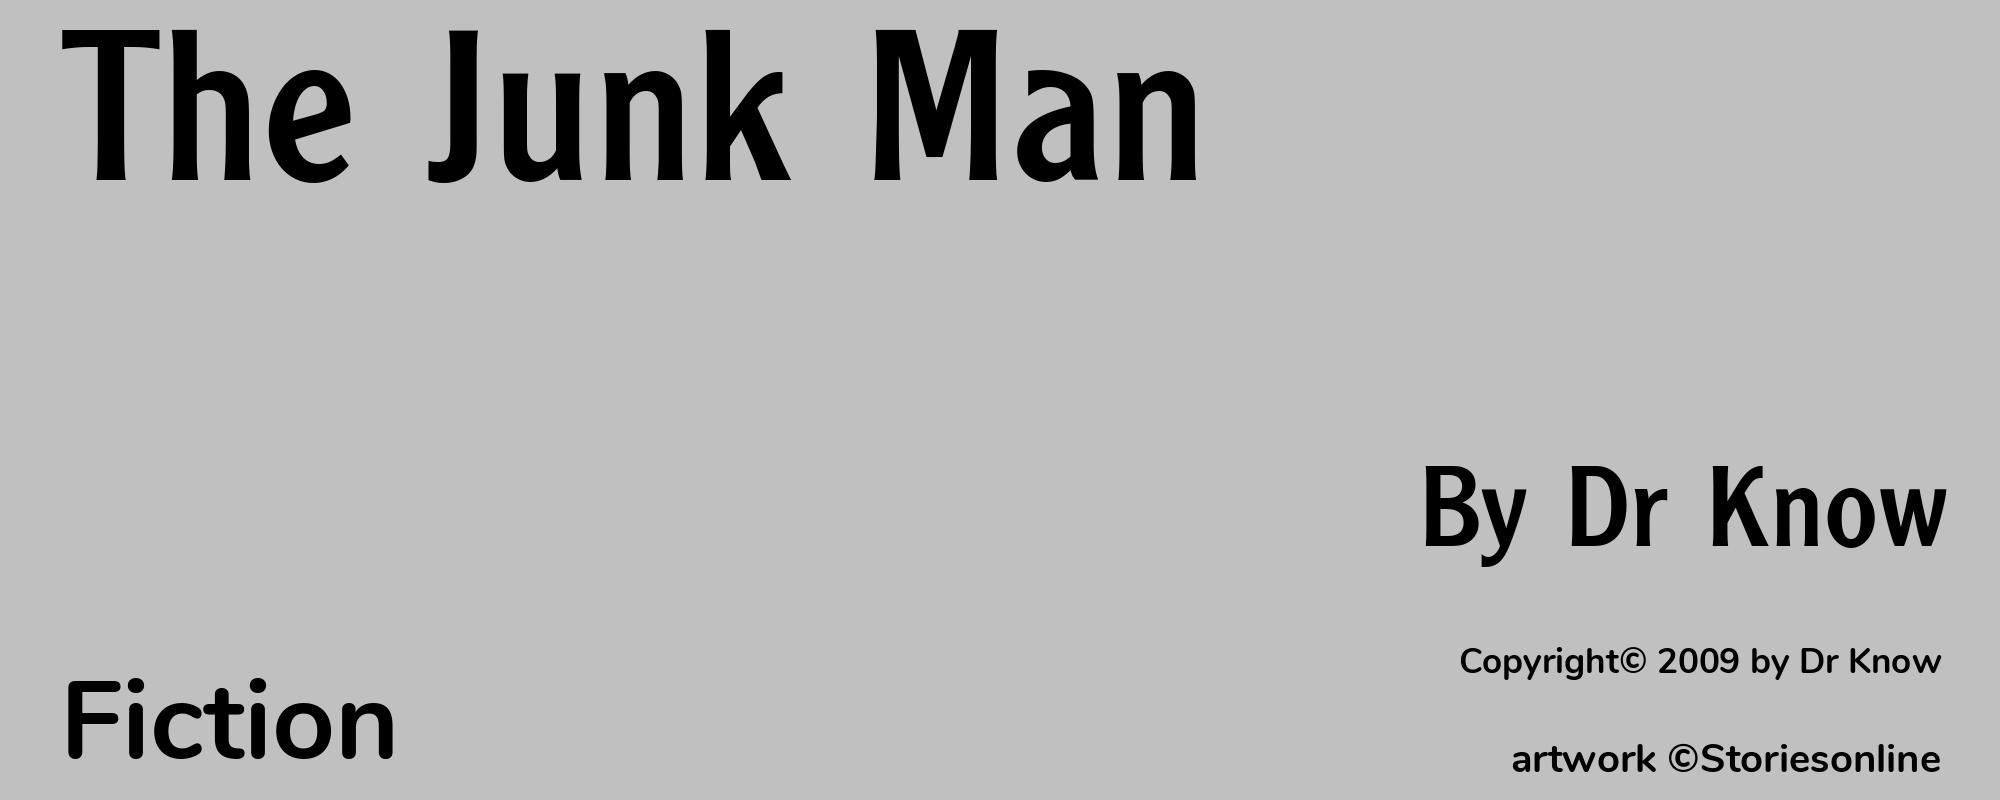 The Junk Man - Cover